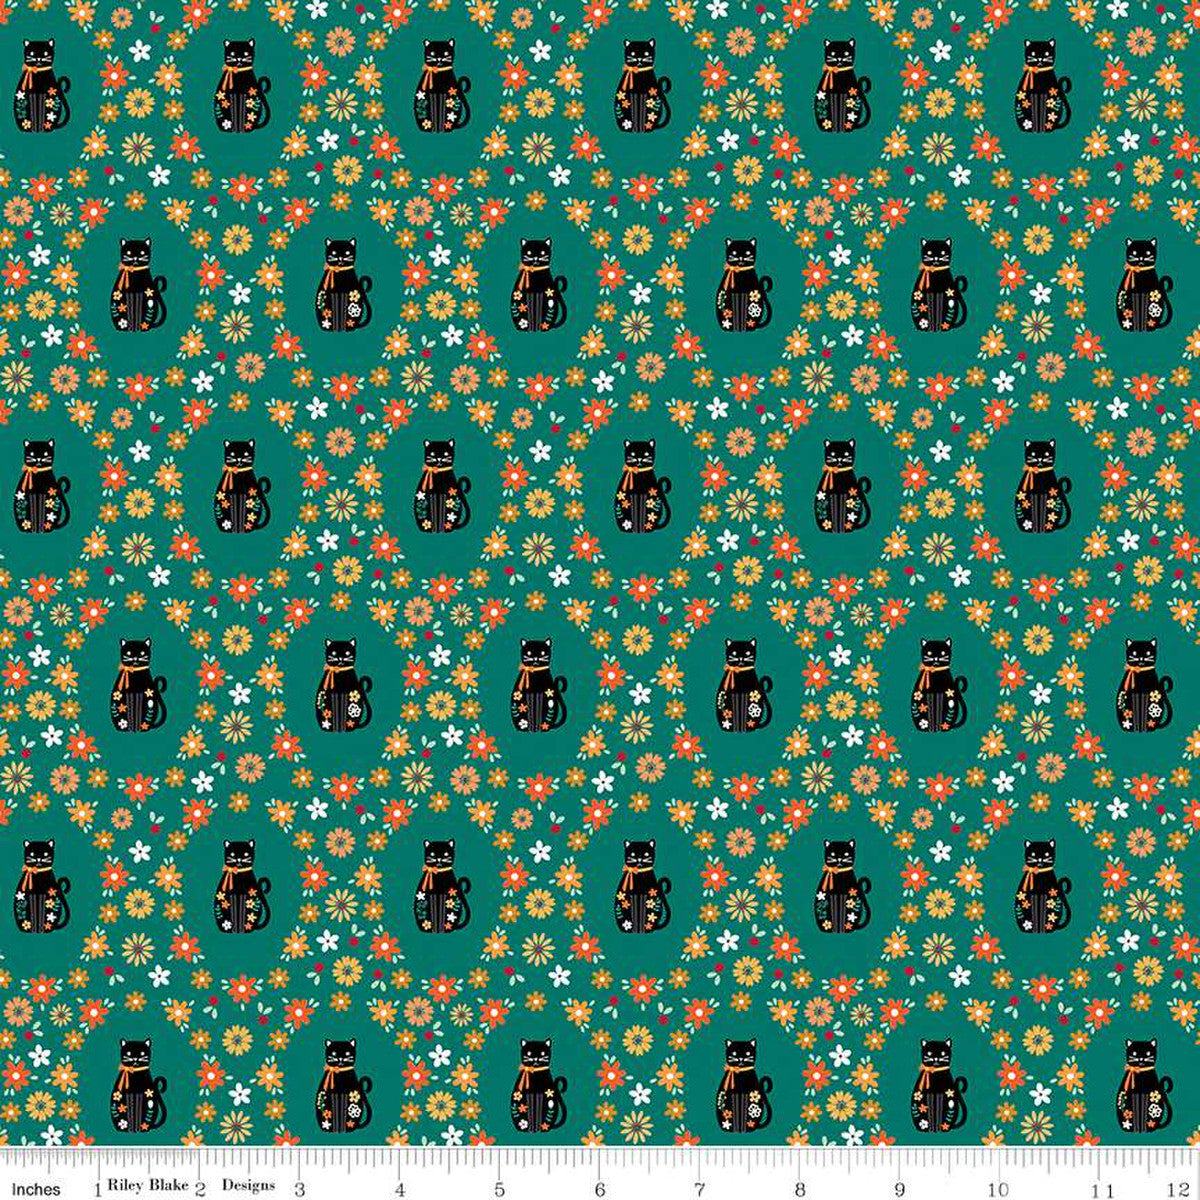 Haunted Adventure Beverly McCullough for Riley Blake Designs Halloween black cats kitties framed in ovals of flowers of yellow coral pink and white on jade green background cotton quilt weight fabric 